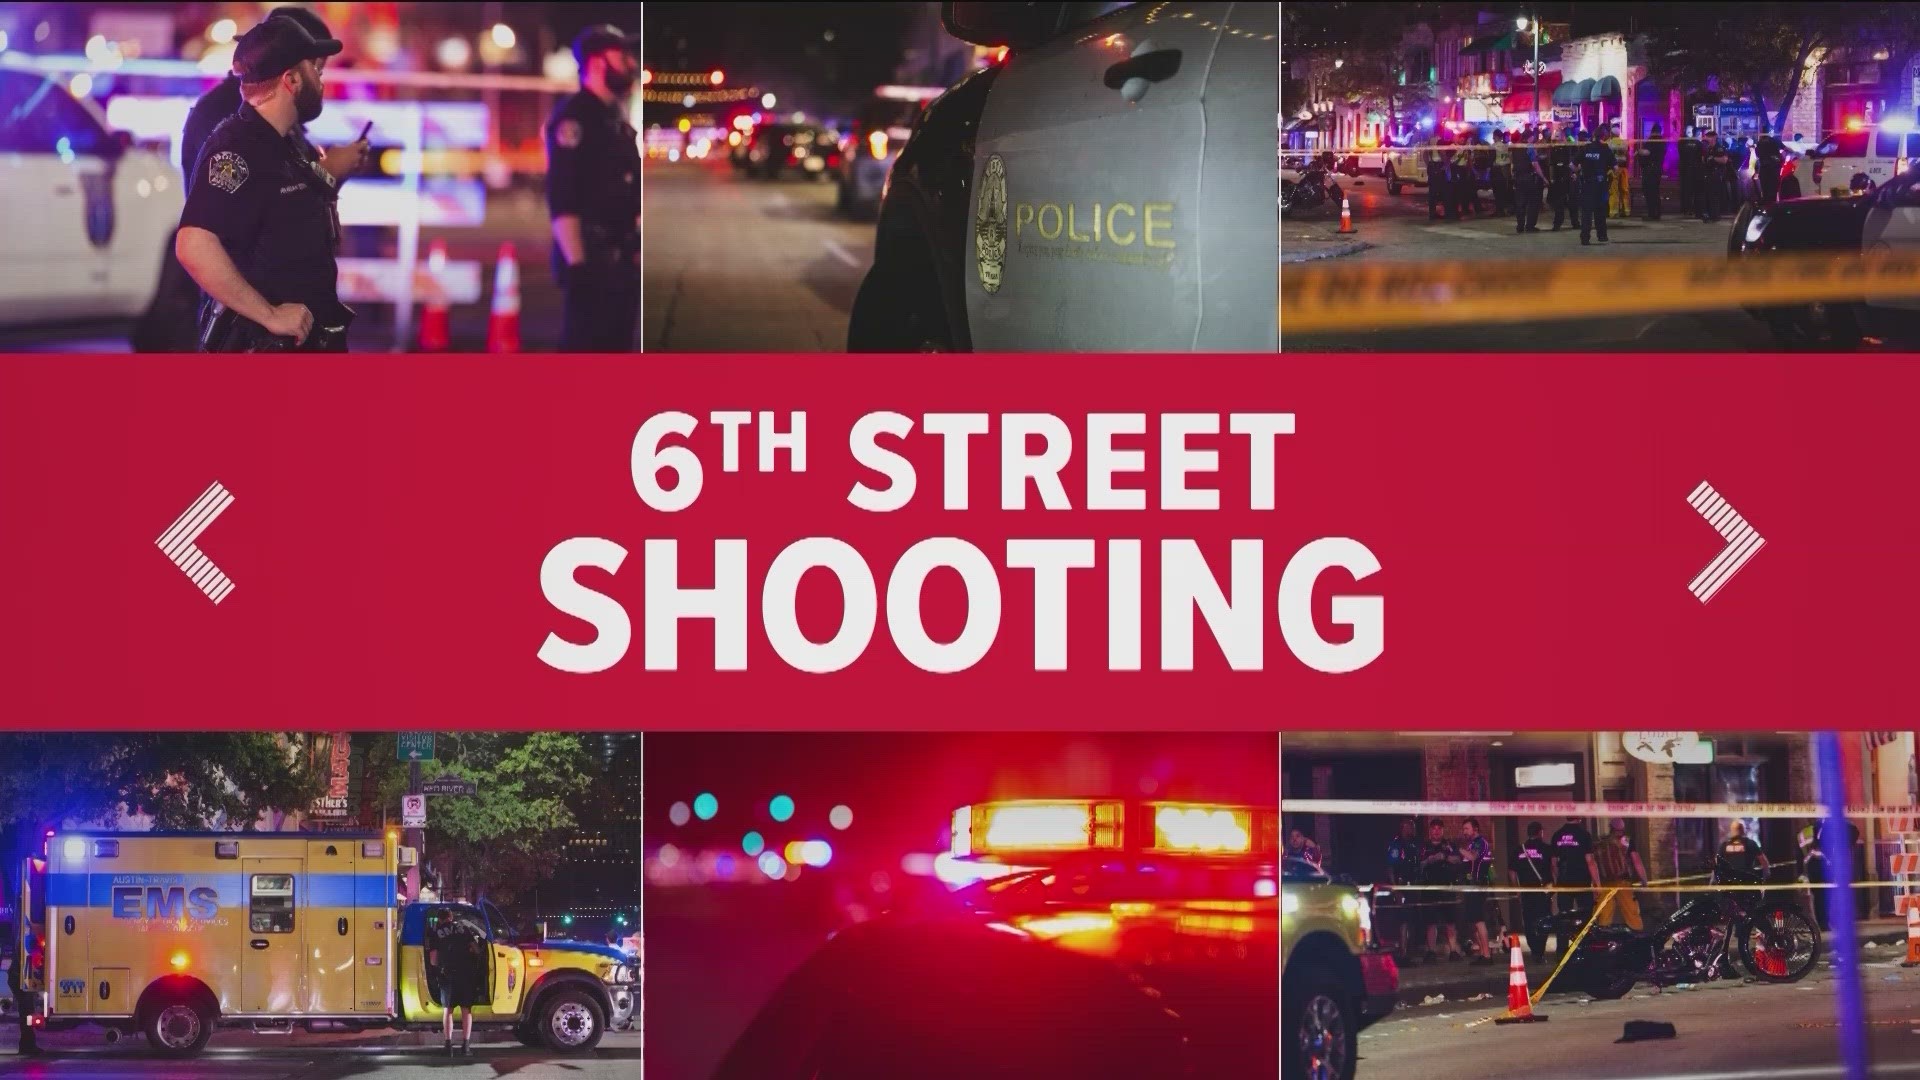 Two years ago, one person was killed and more than a dozen others were injured in a shooting on Sixth Street in Downtown Austin.